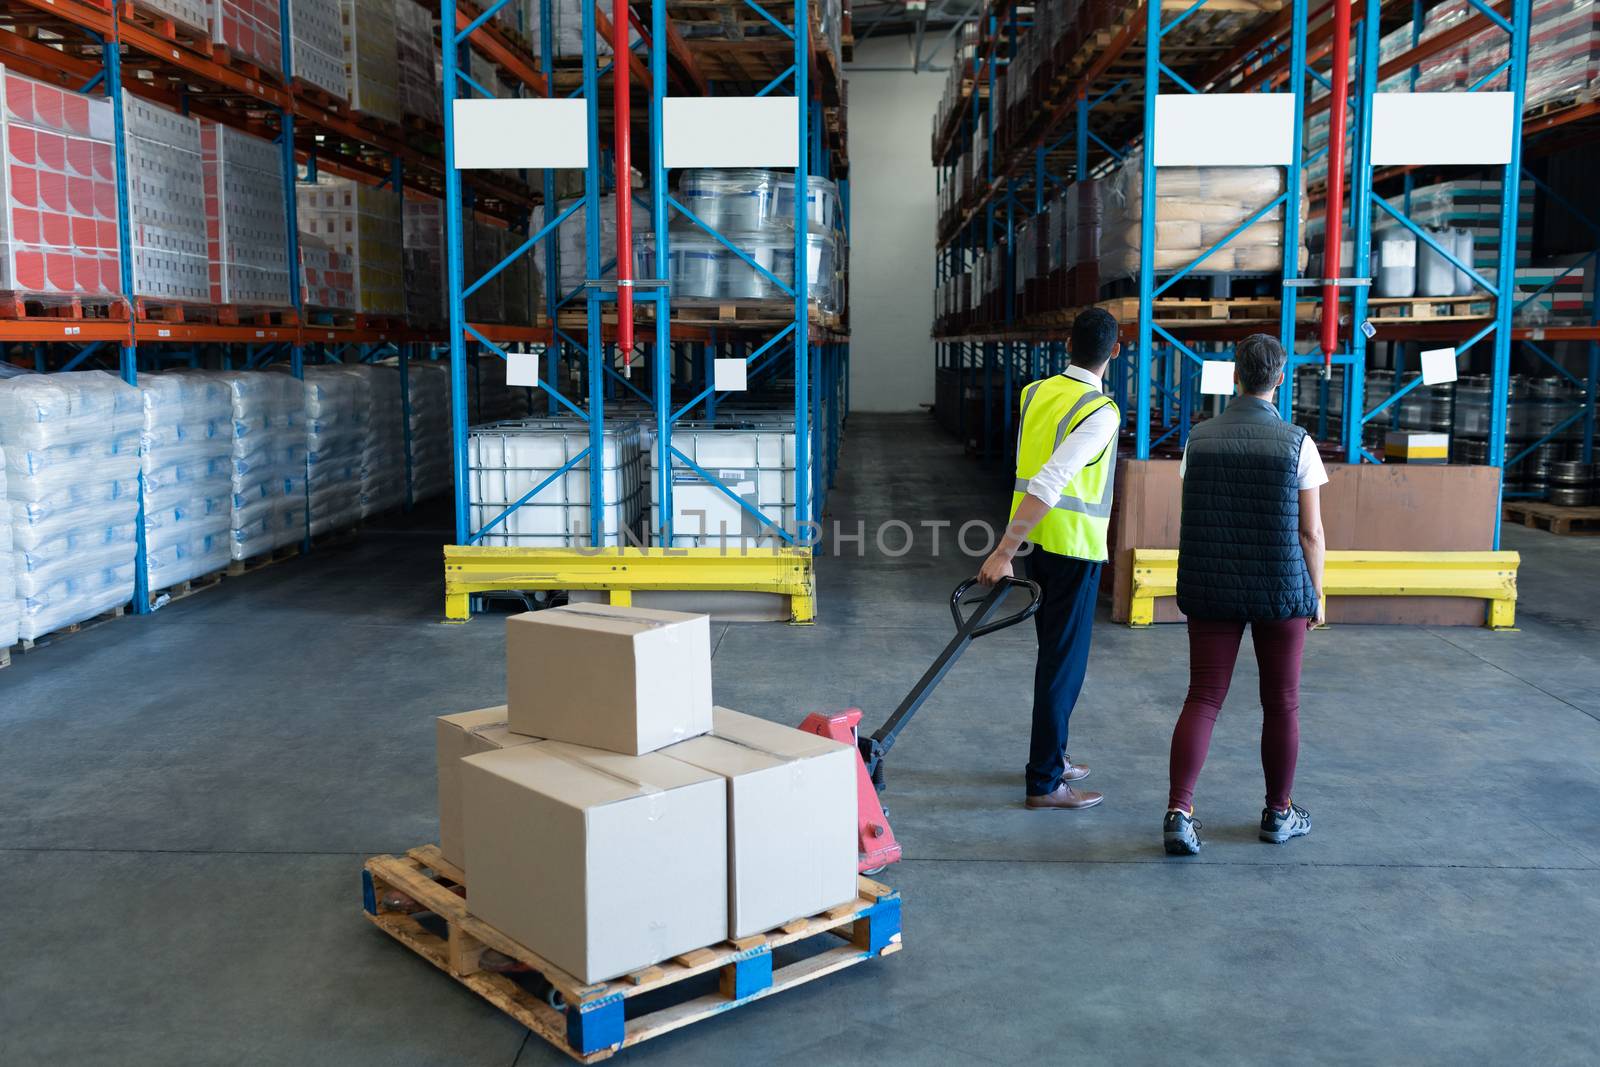 Rear view of Caucasian Male staff with his coworker using pallet jack in warehouse. This is a freight transportation and distribution warehouse. Industrial and industrial workers concept